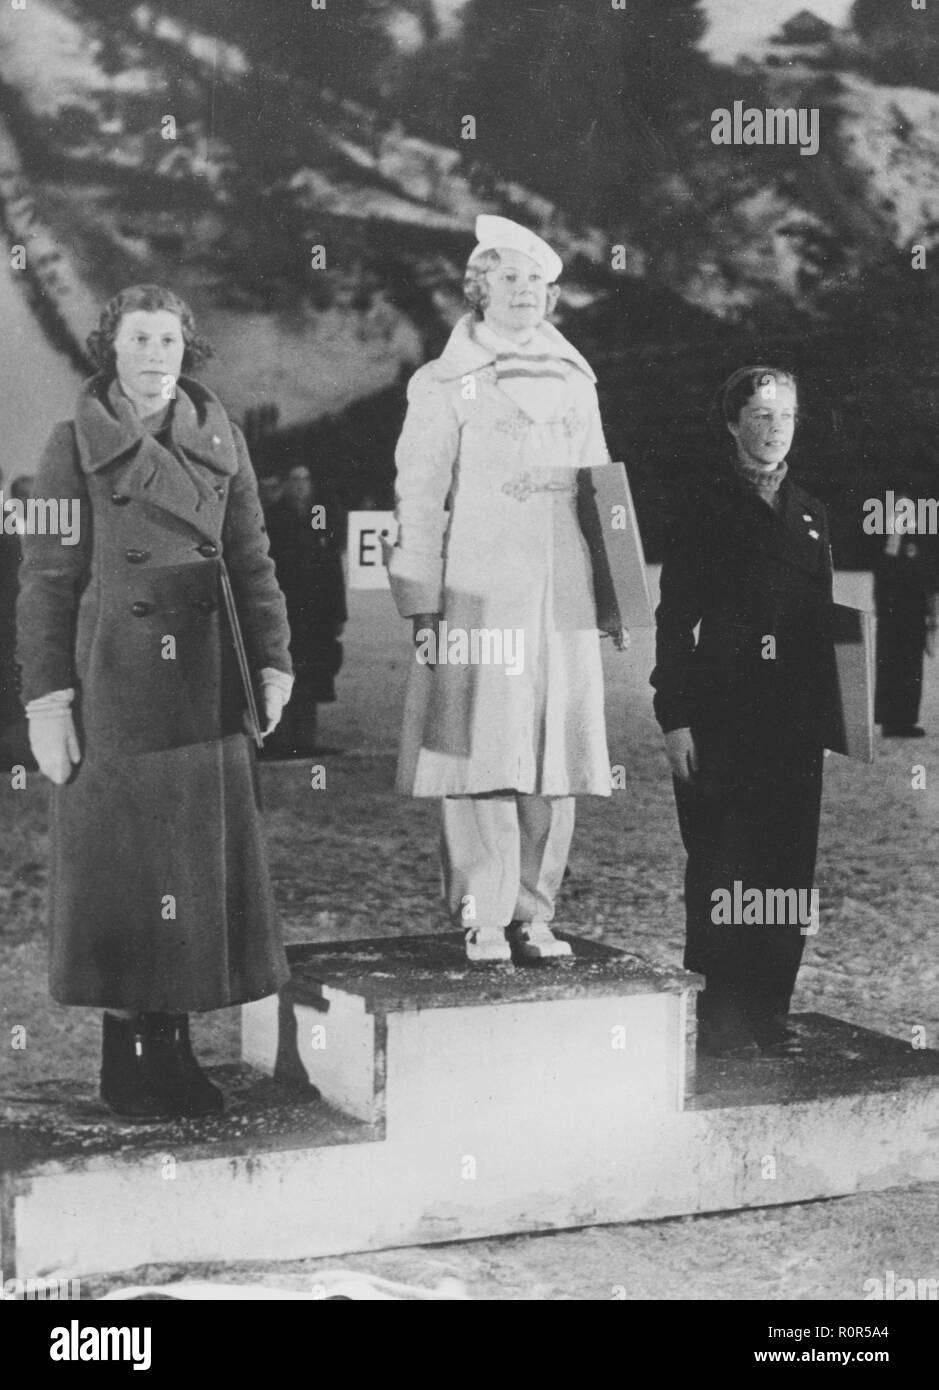 Olympic winter games 1936 Garmisch-Partenkirchen. The prize ceremony for womens figure skating with winner in the middle, Sonja Henie. Second is british Cecilia Colledge and third swedish Vivi-Anne Hultén. Stock Photo